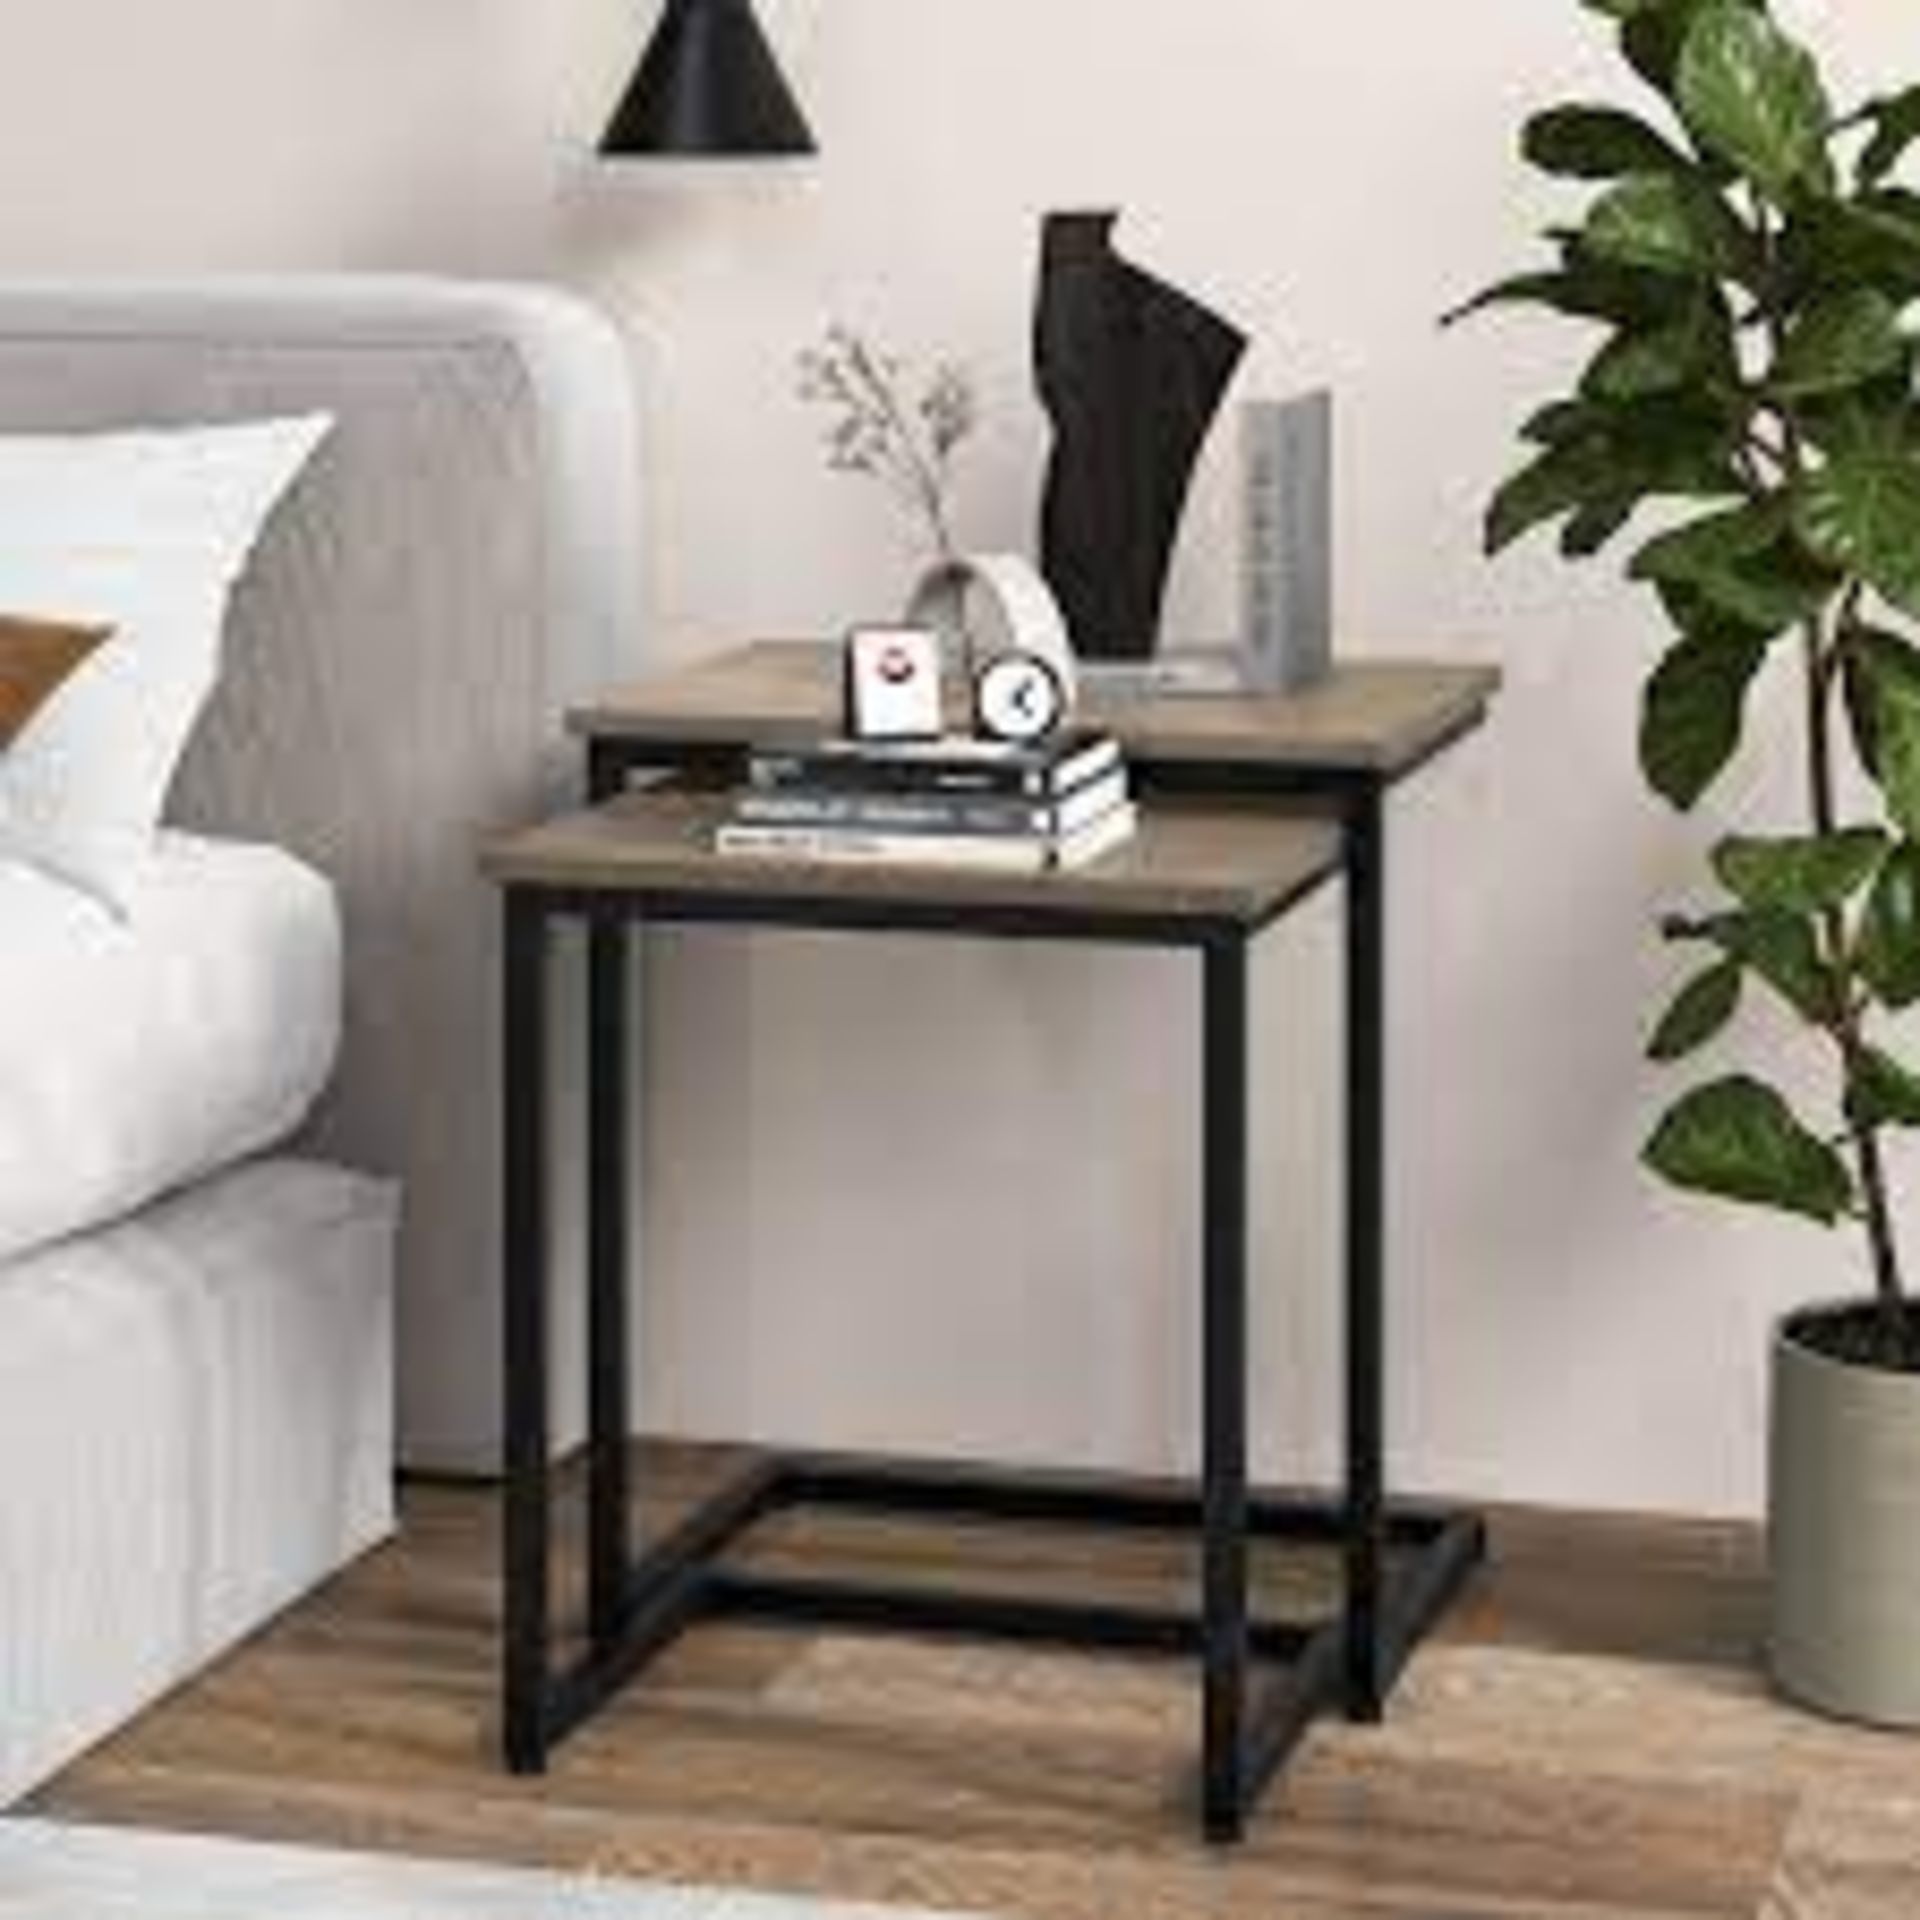 C-shaped Nesting Coffee End Table Set of 3 Rectangle Stacking Sides. - ER54